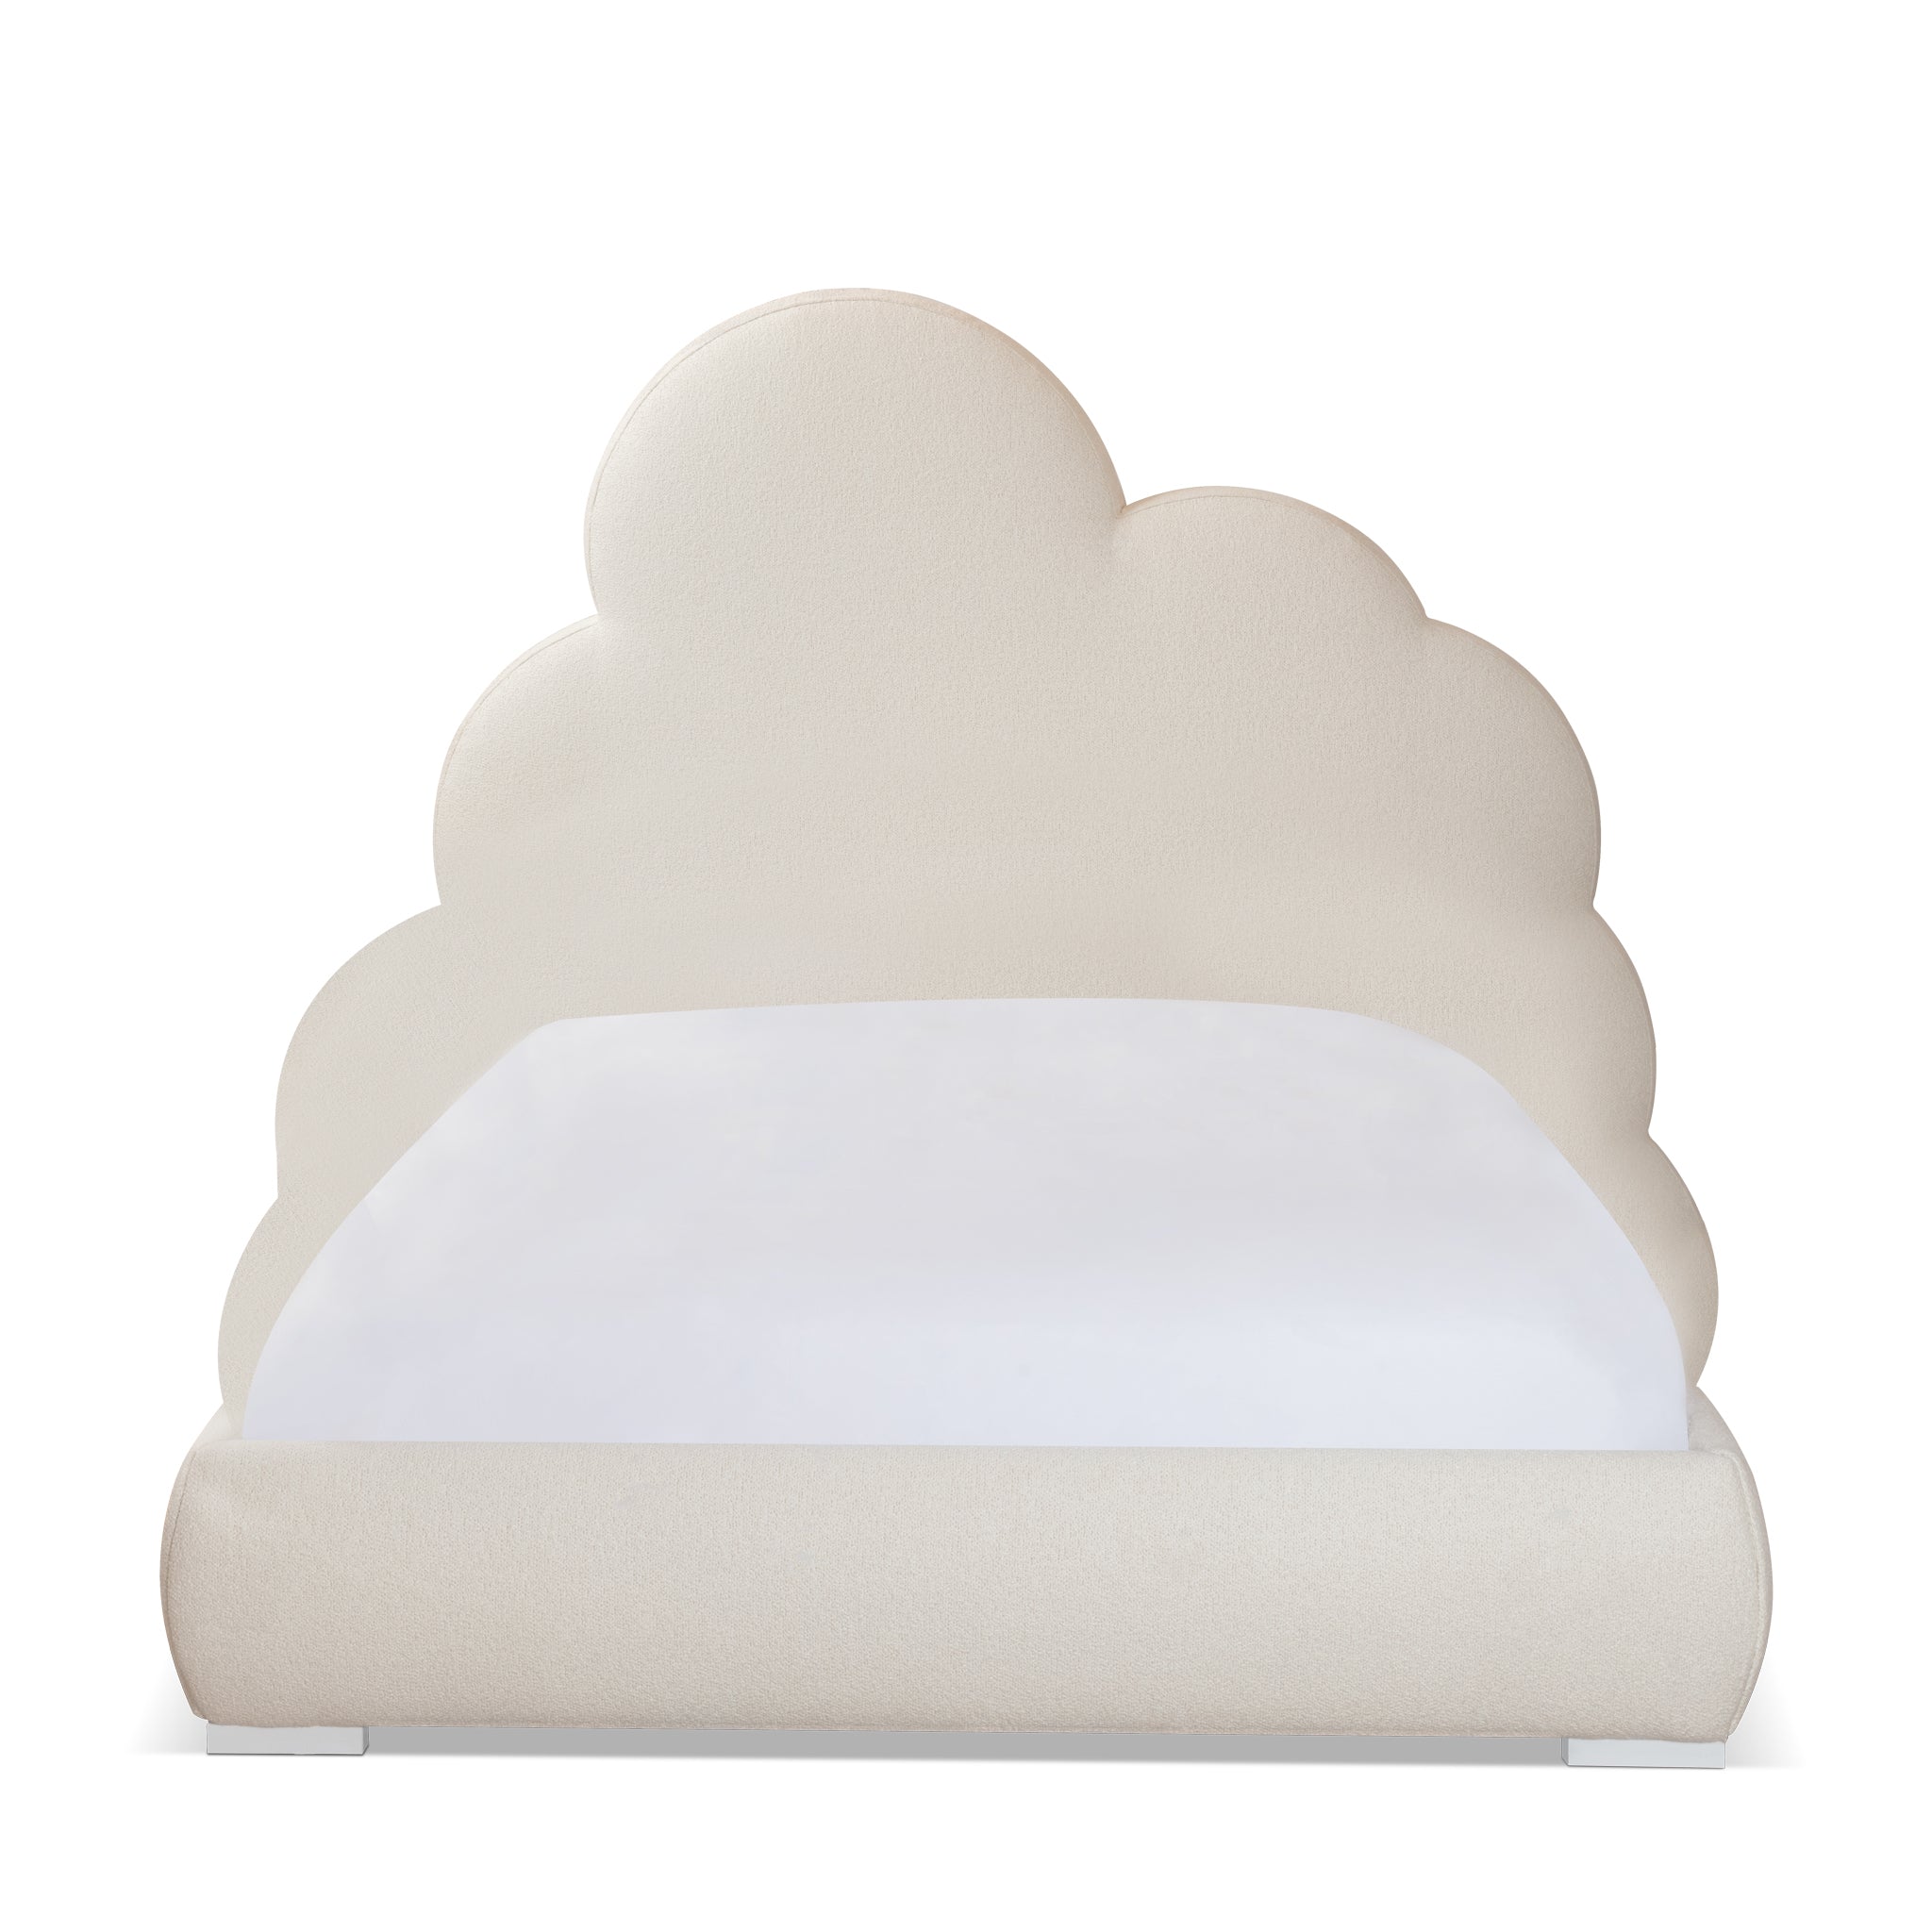 CLOUD BED A LEFT ANGLED US QUEEN SIZE